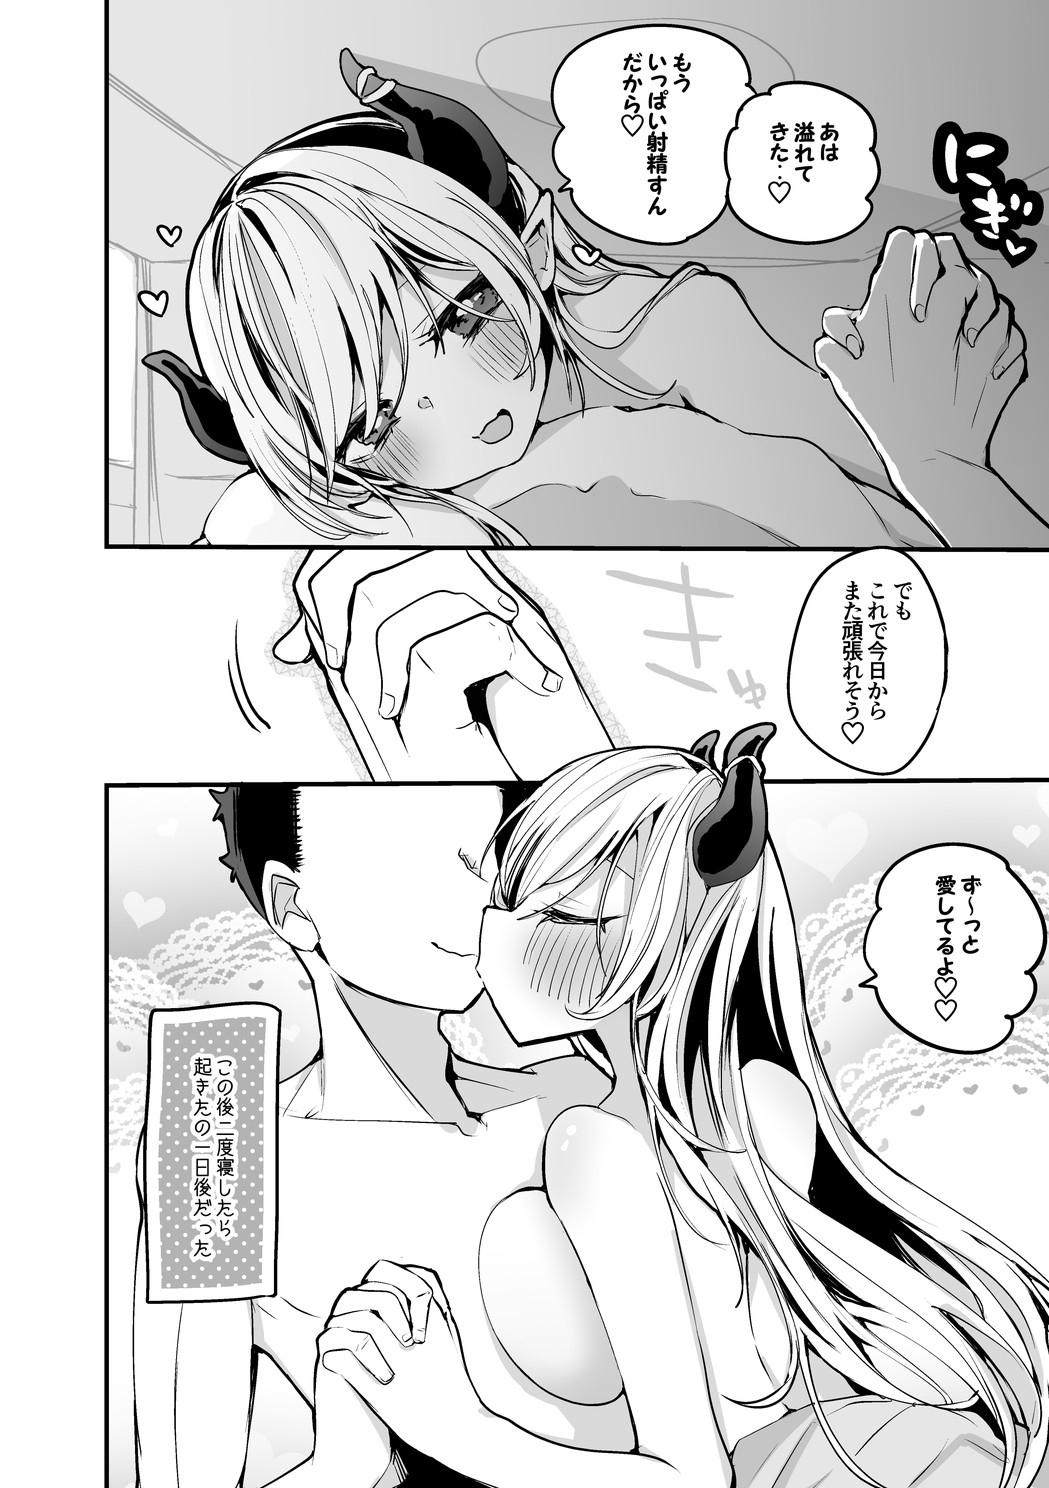 Public Fuck ちょこ先生は久々に編 - Hololive Nudity - Page 7